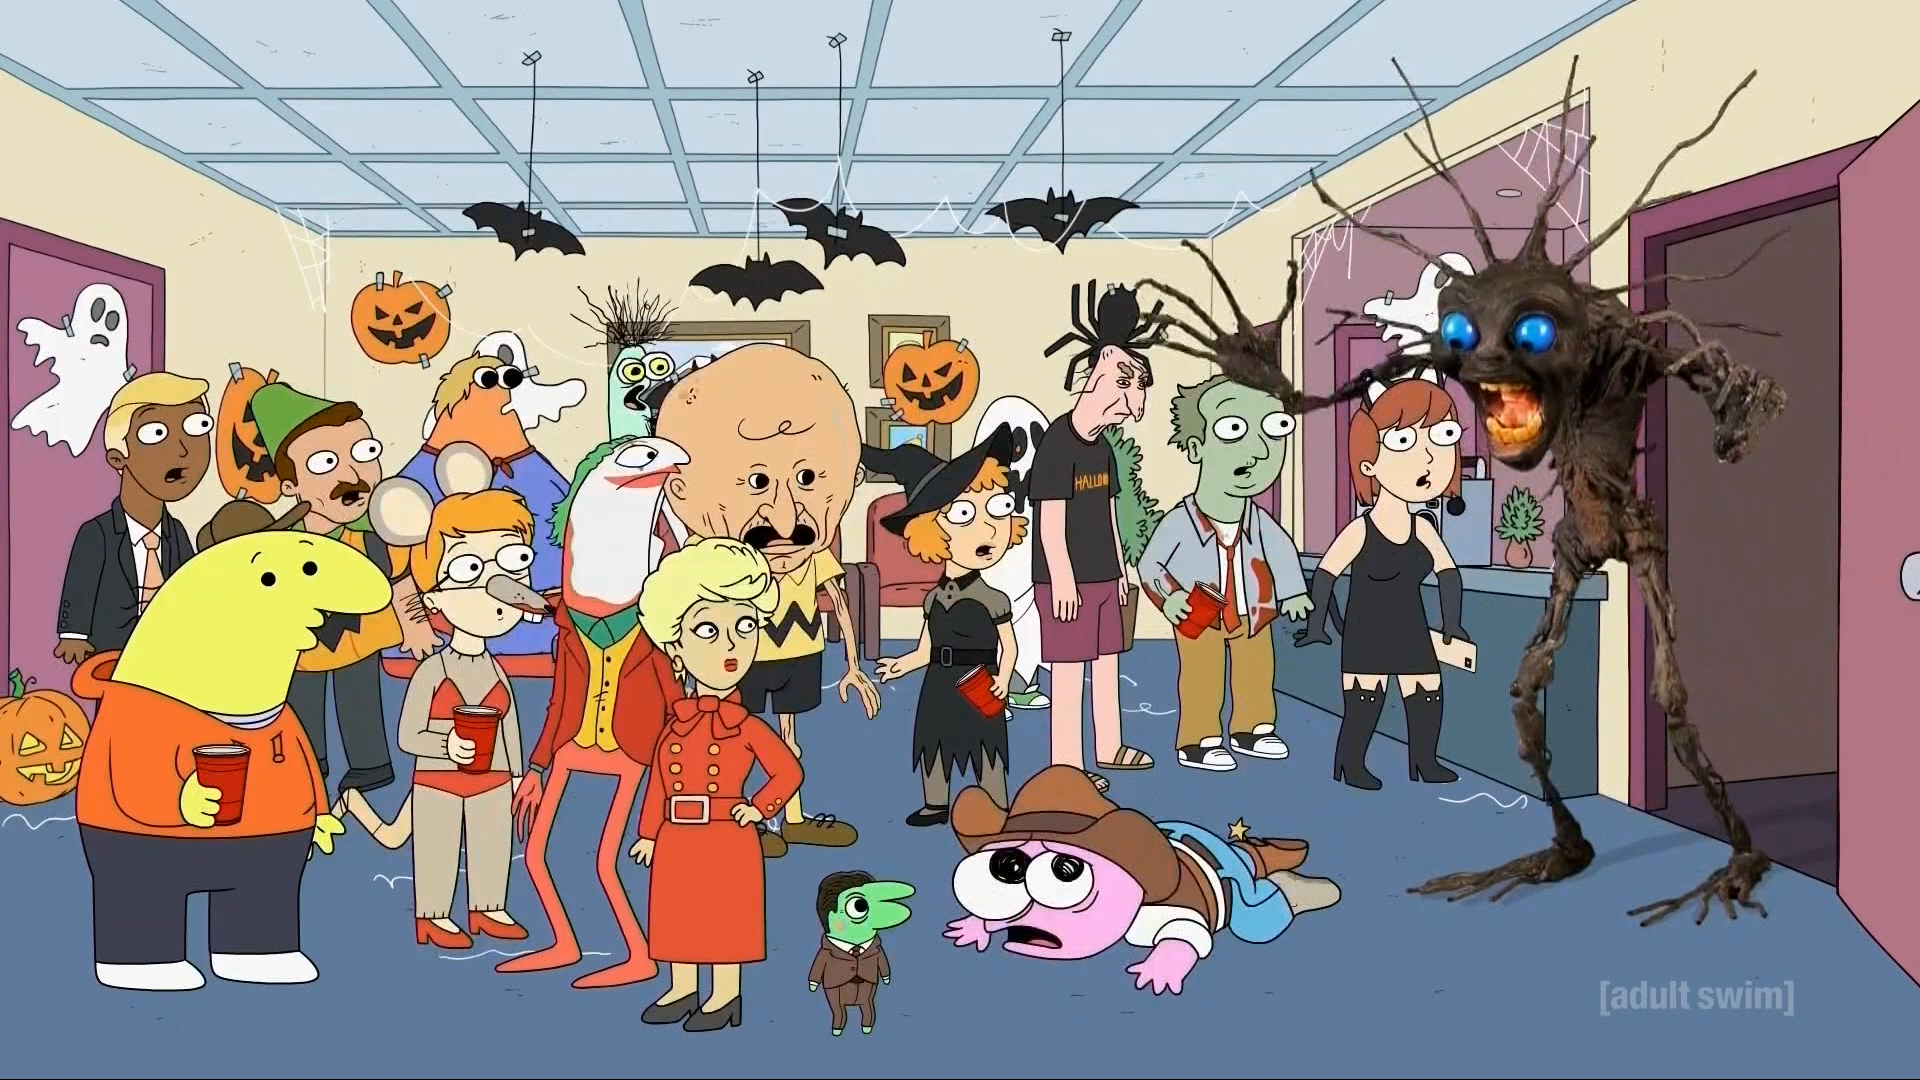 Smiling Friends/A Silly Halloween Special Cartoon Network/Adult Swim Archives Wiki Fandom